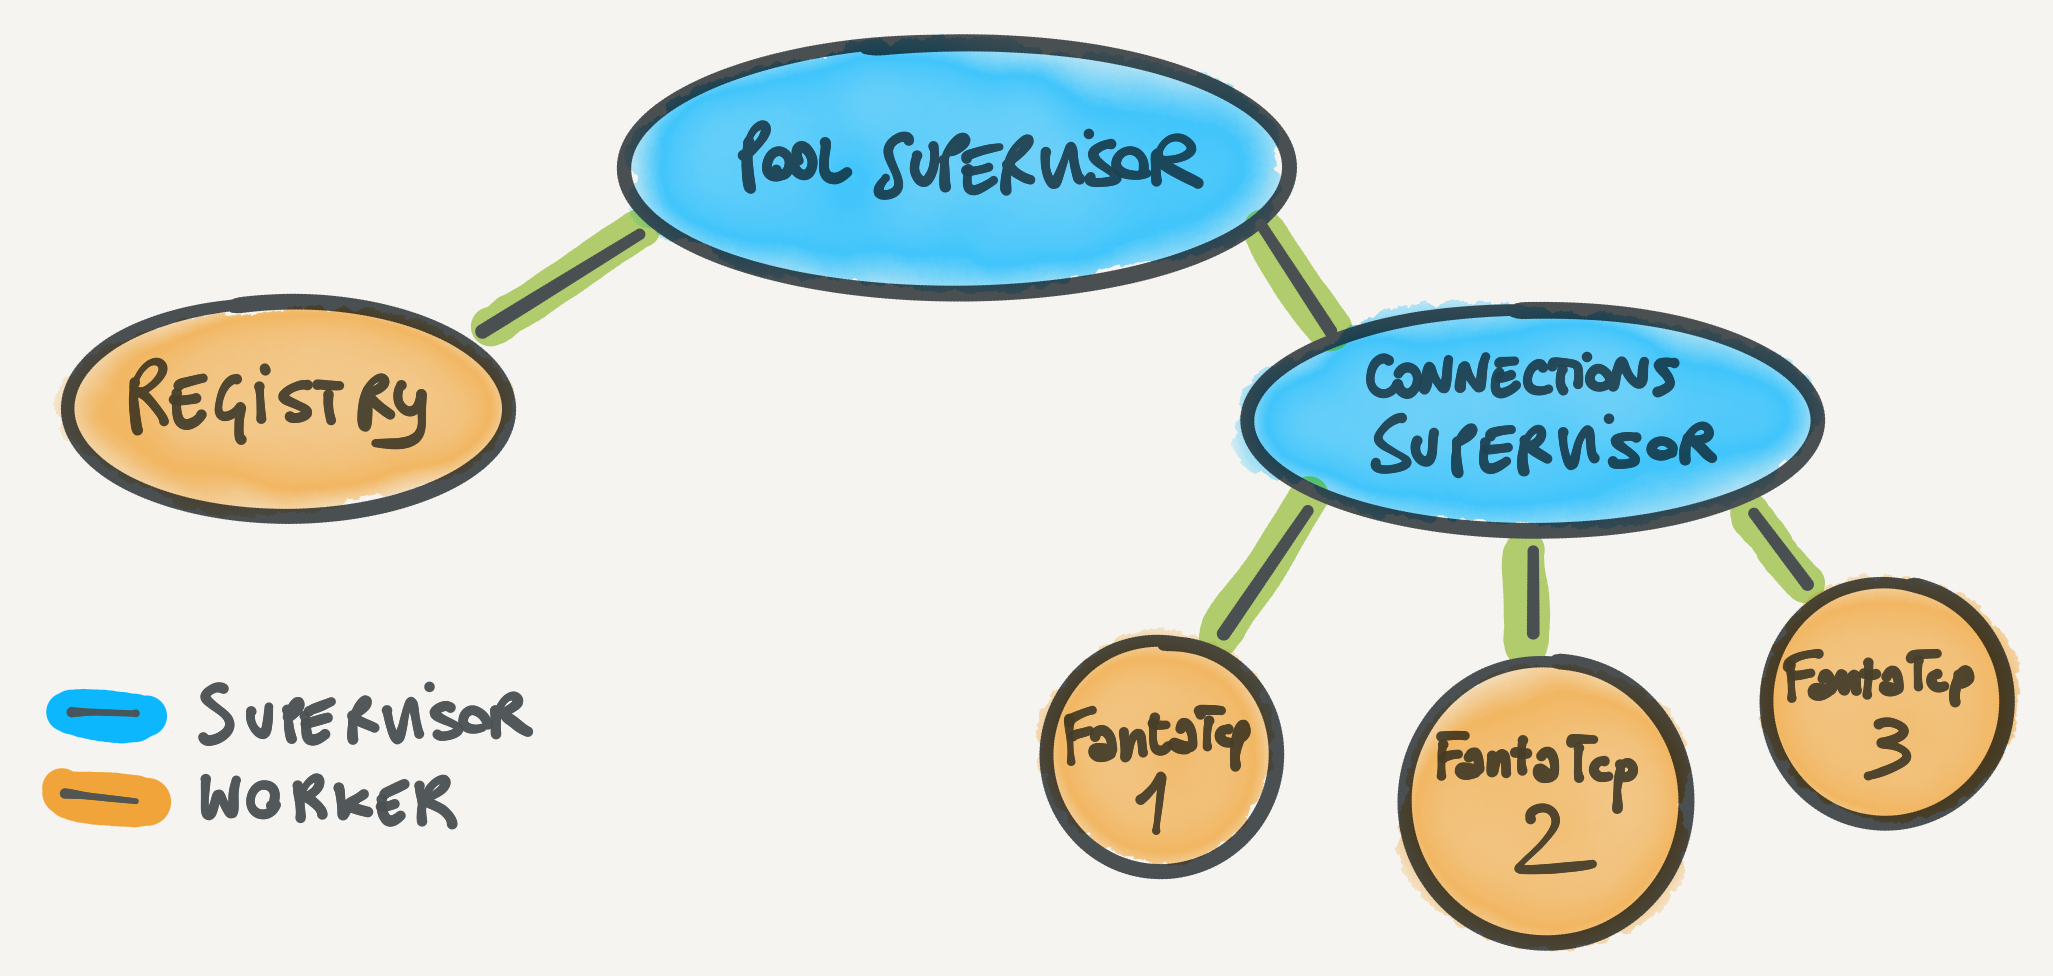 Sketch of the pool supervision tree